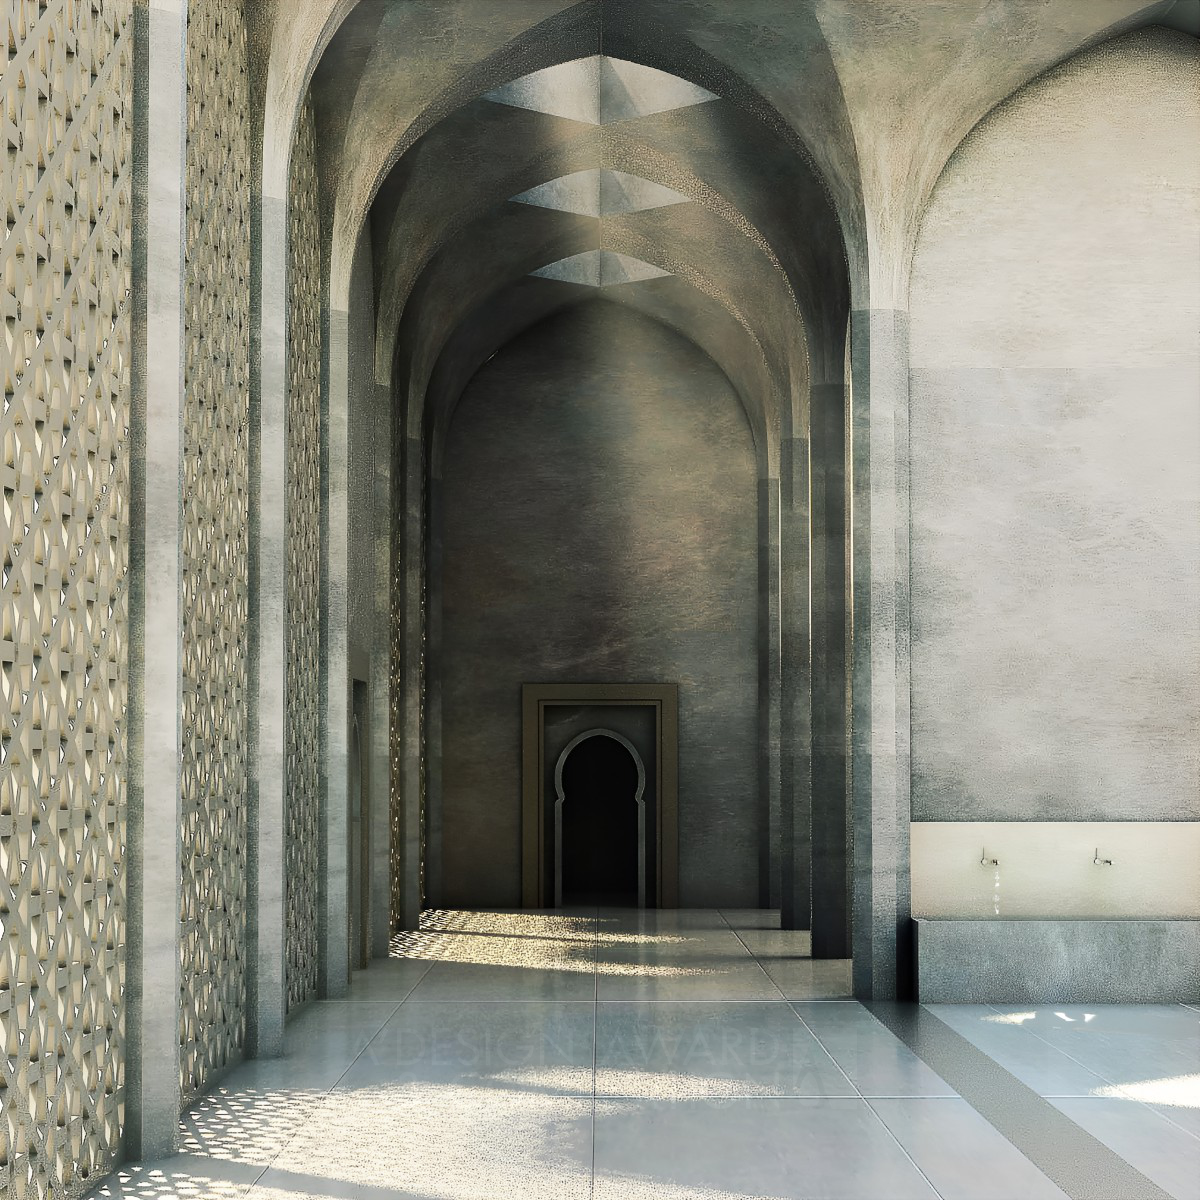 Islamic Distiller: A Mosque Design Solving Water Scarcity Issues